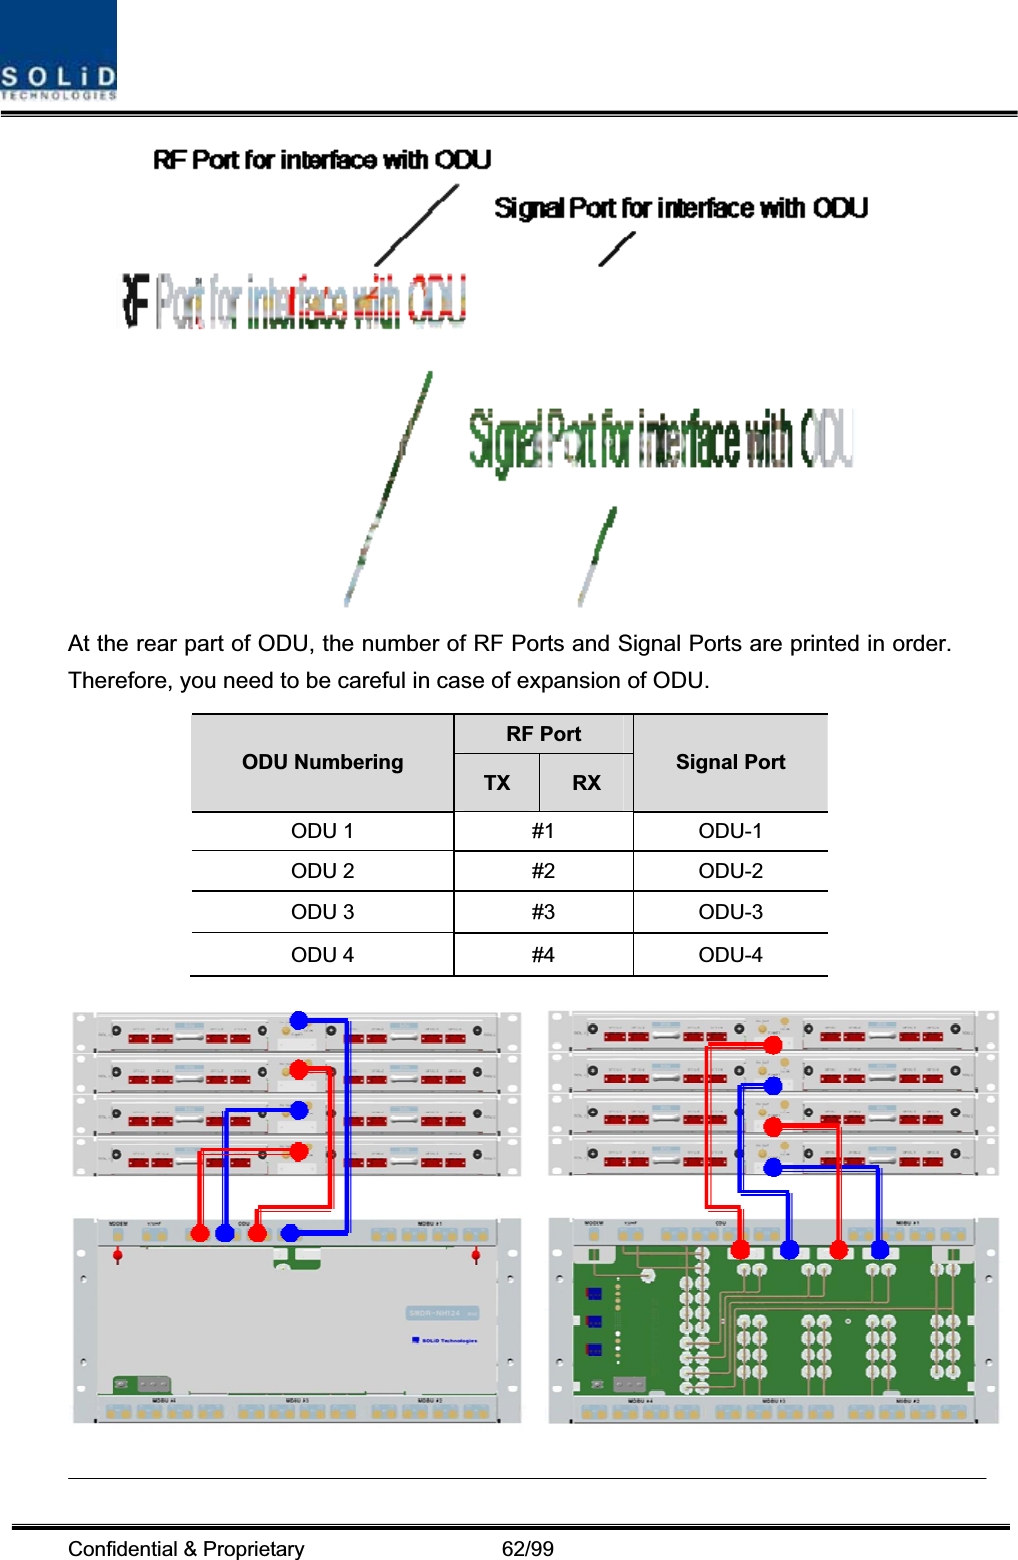 Confidential &amp; Proprietary                   62/99 At the rear part of ODU, the number of RF Ports and Signal Ports are printed in order. Therefore, you need to be careful in case of expansion of ODU. RF Port ODU Numbering TX RXSignal Port ODU 1  #1  ODU-1 ODU 2  #2  ODU-2 ODU 3  #3  ODU-3 ODU 4  #4  ODU-4 